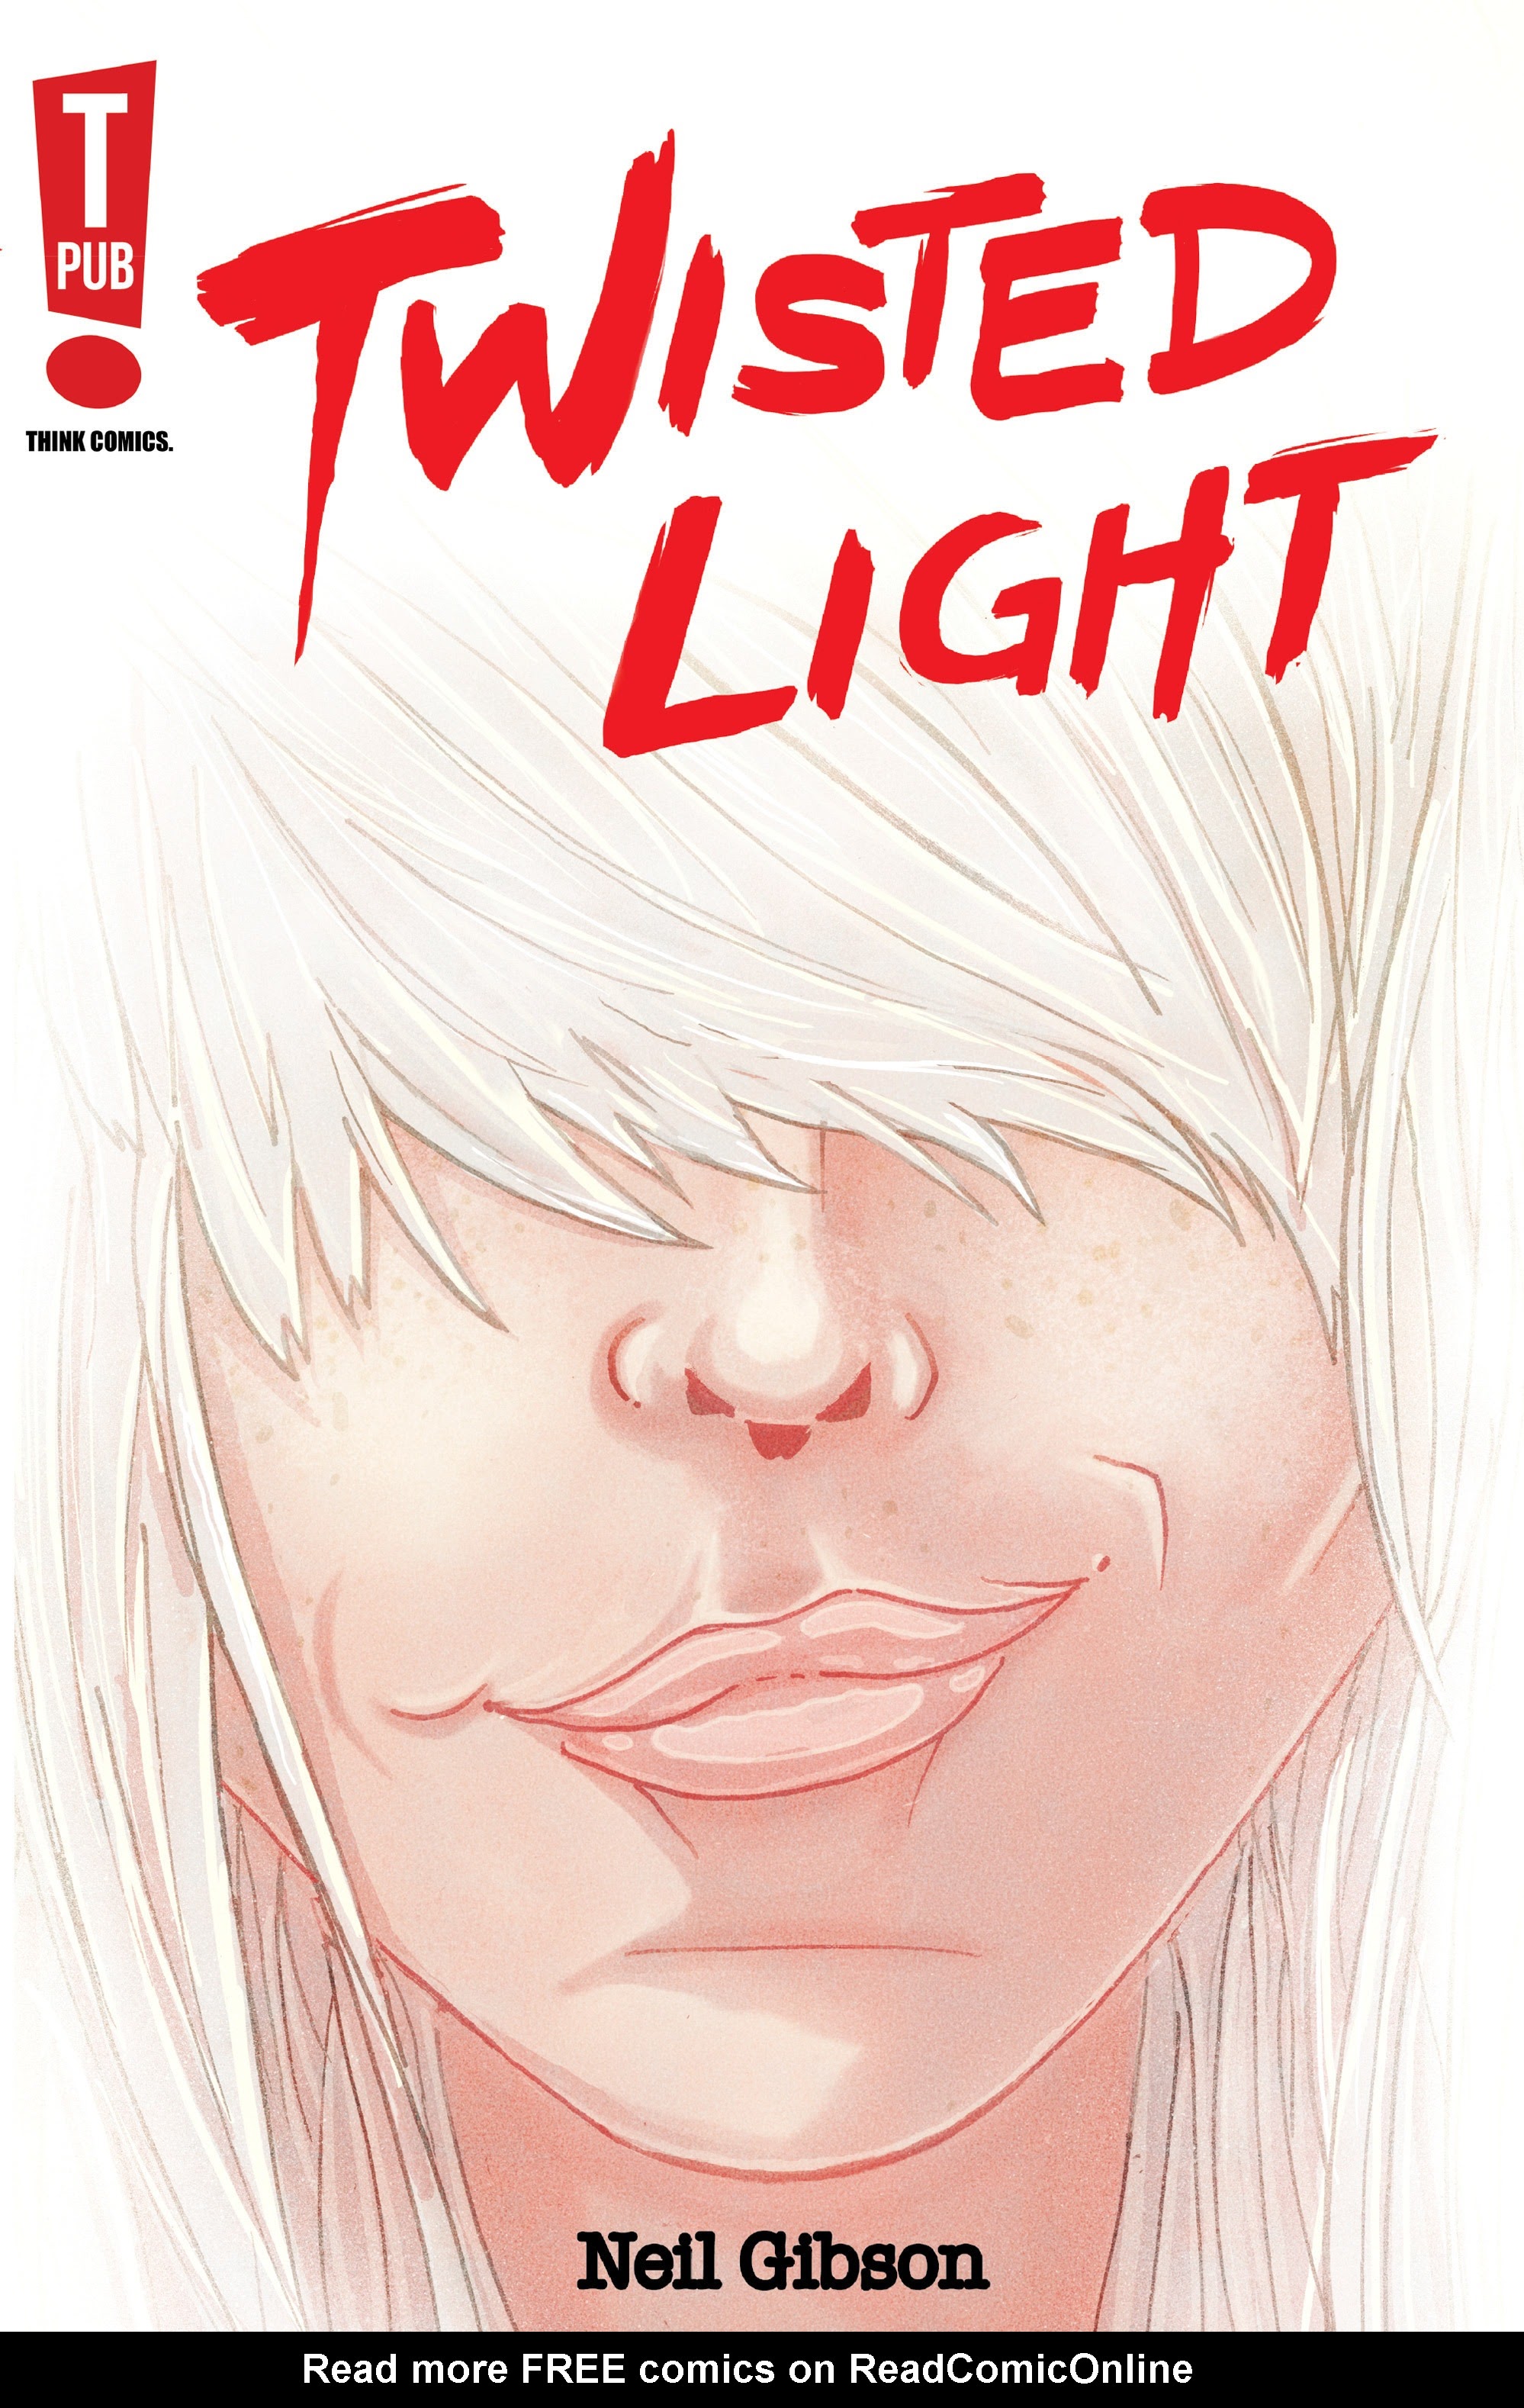 Read online Twisted Light comic -  Issue # TPB - 1